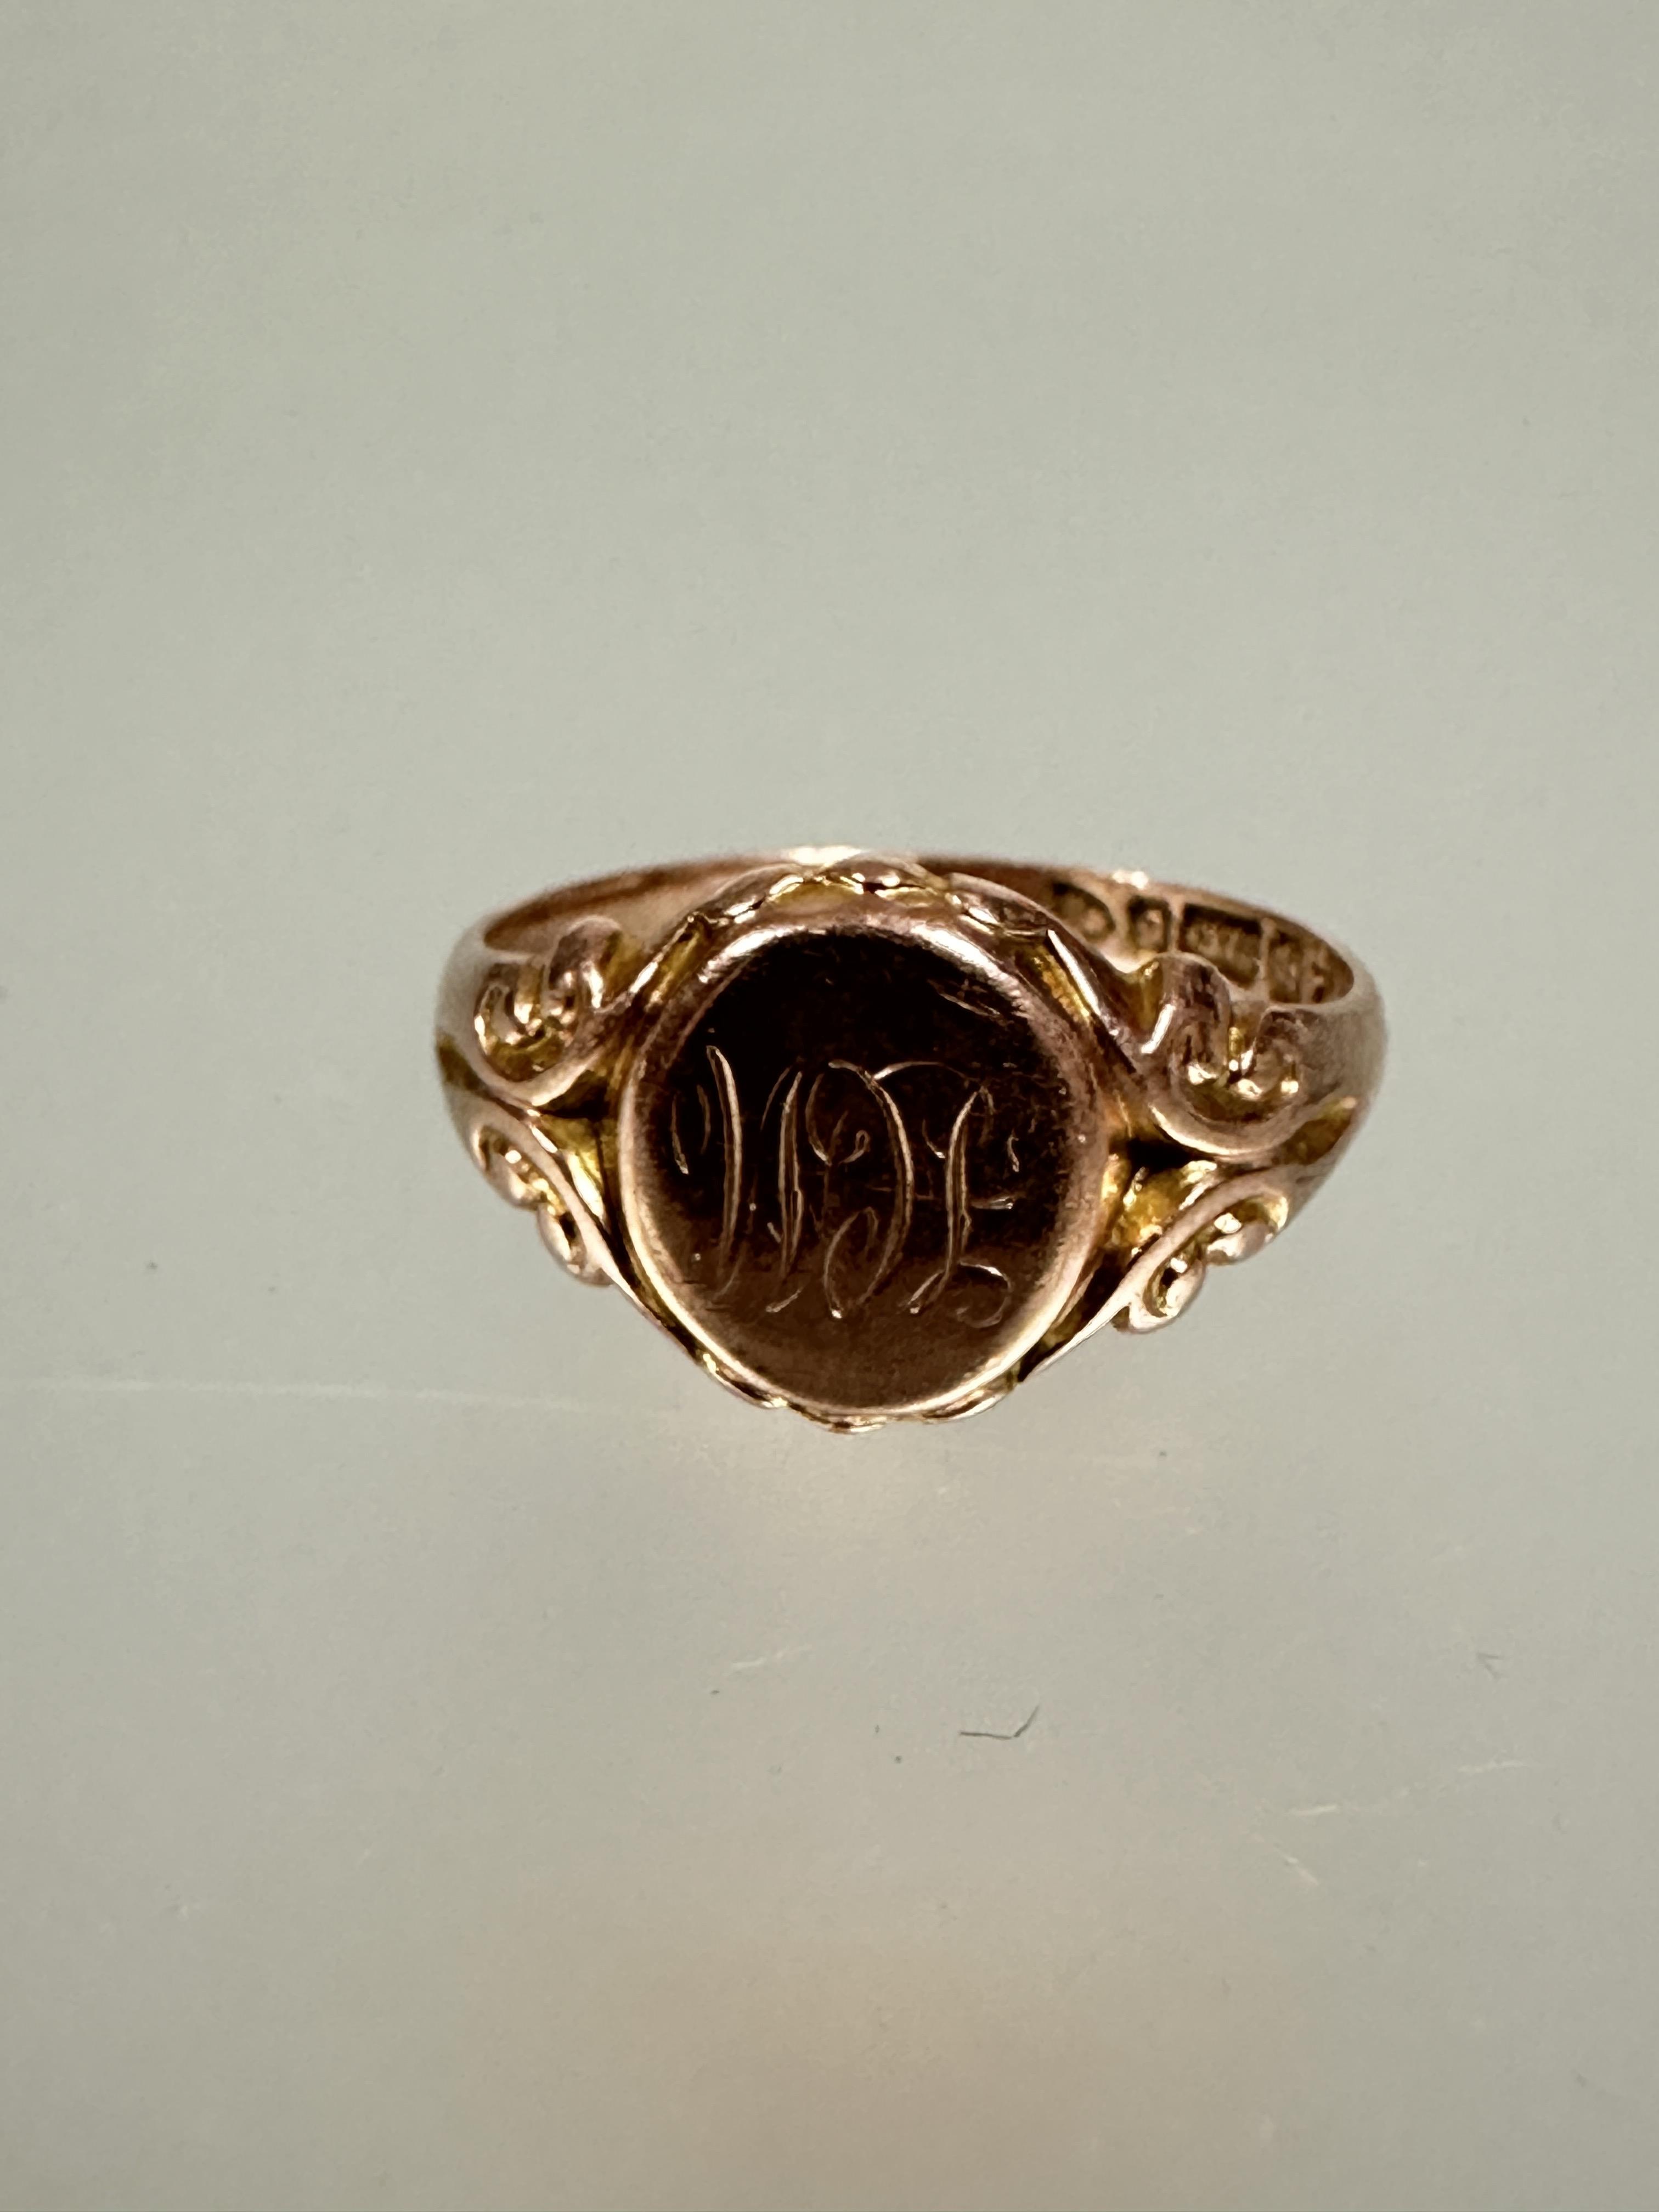 A 9ct rose gold signet ring with engraved intials TCM M 2.96g